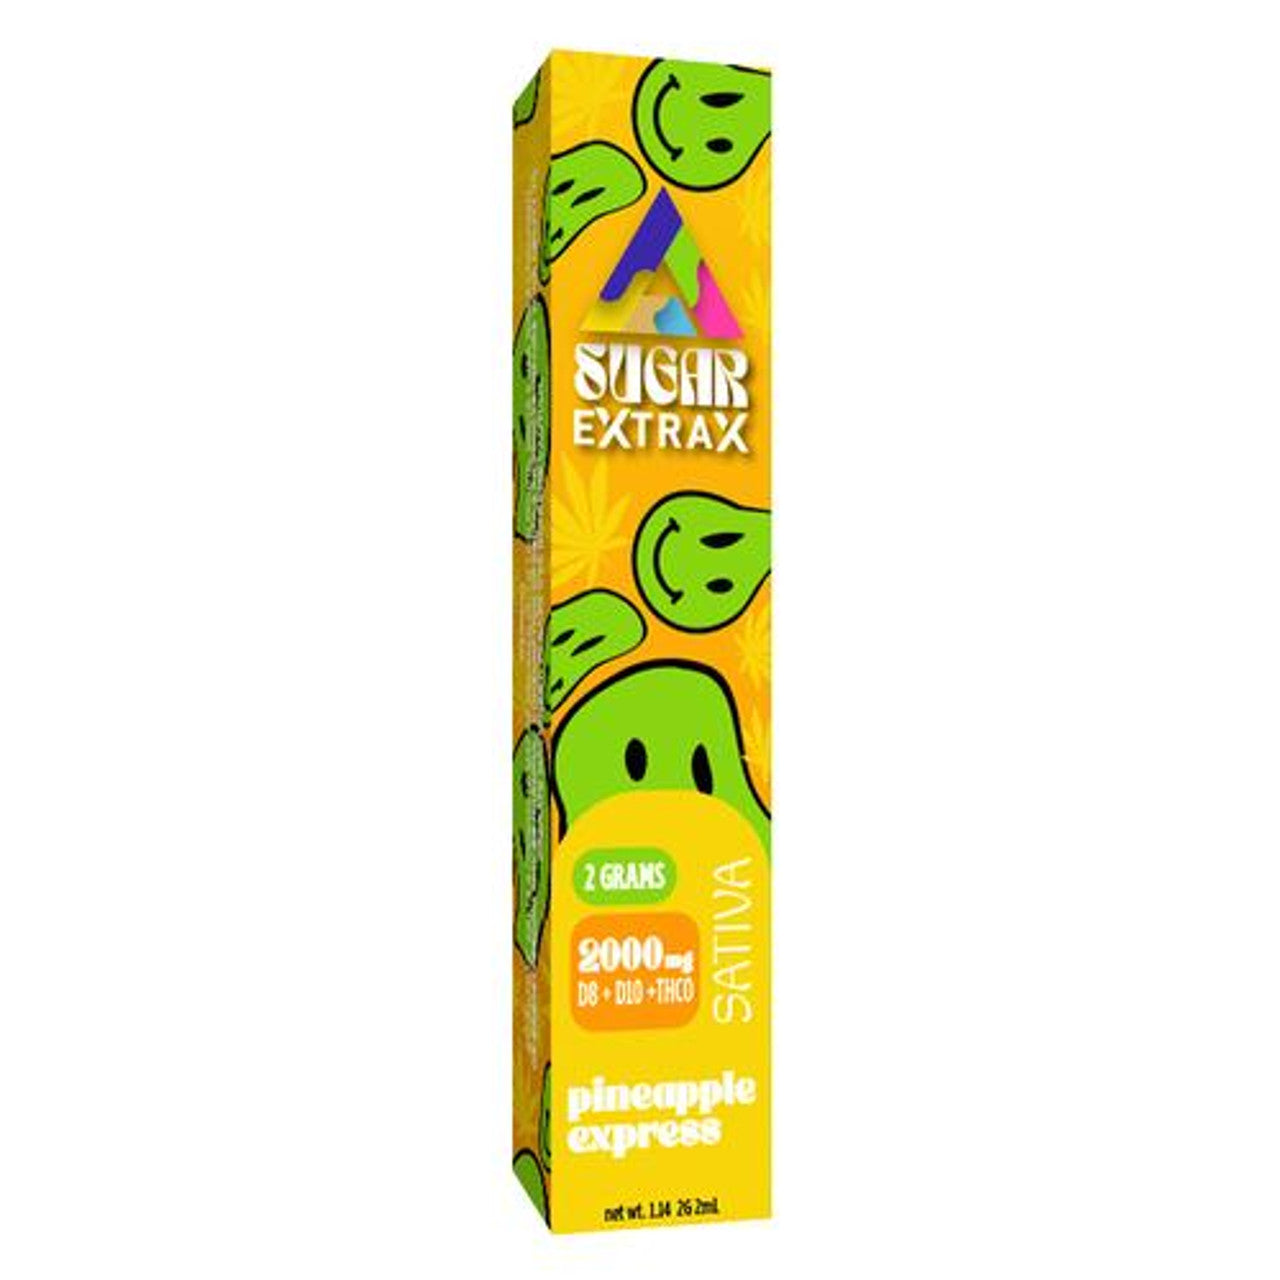 Pineapple Express Sugar Extrax Disposable